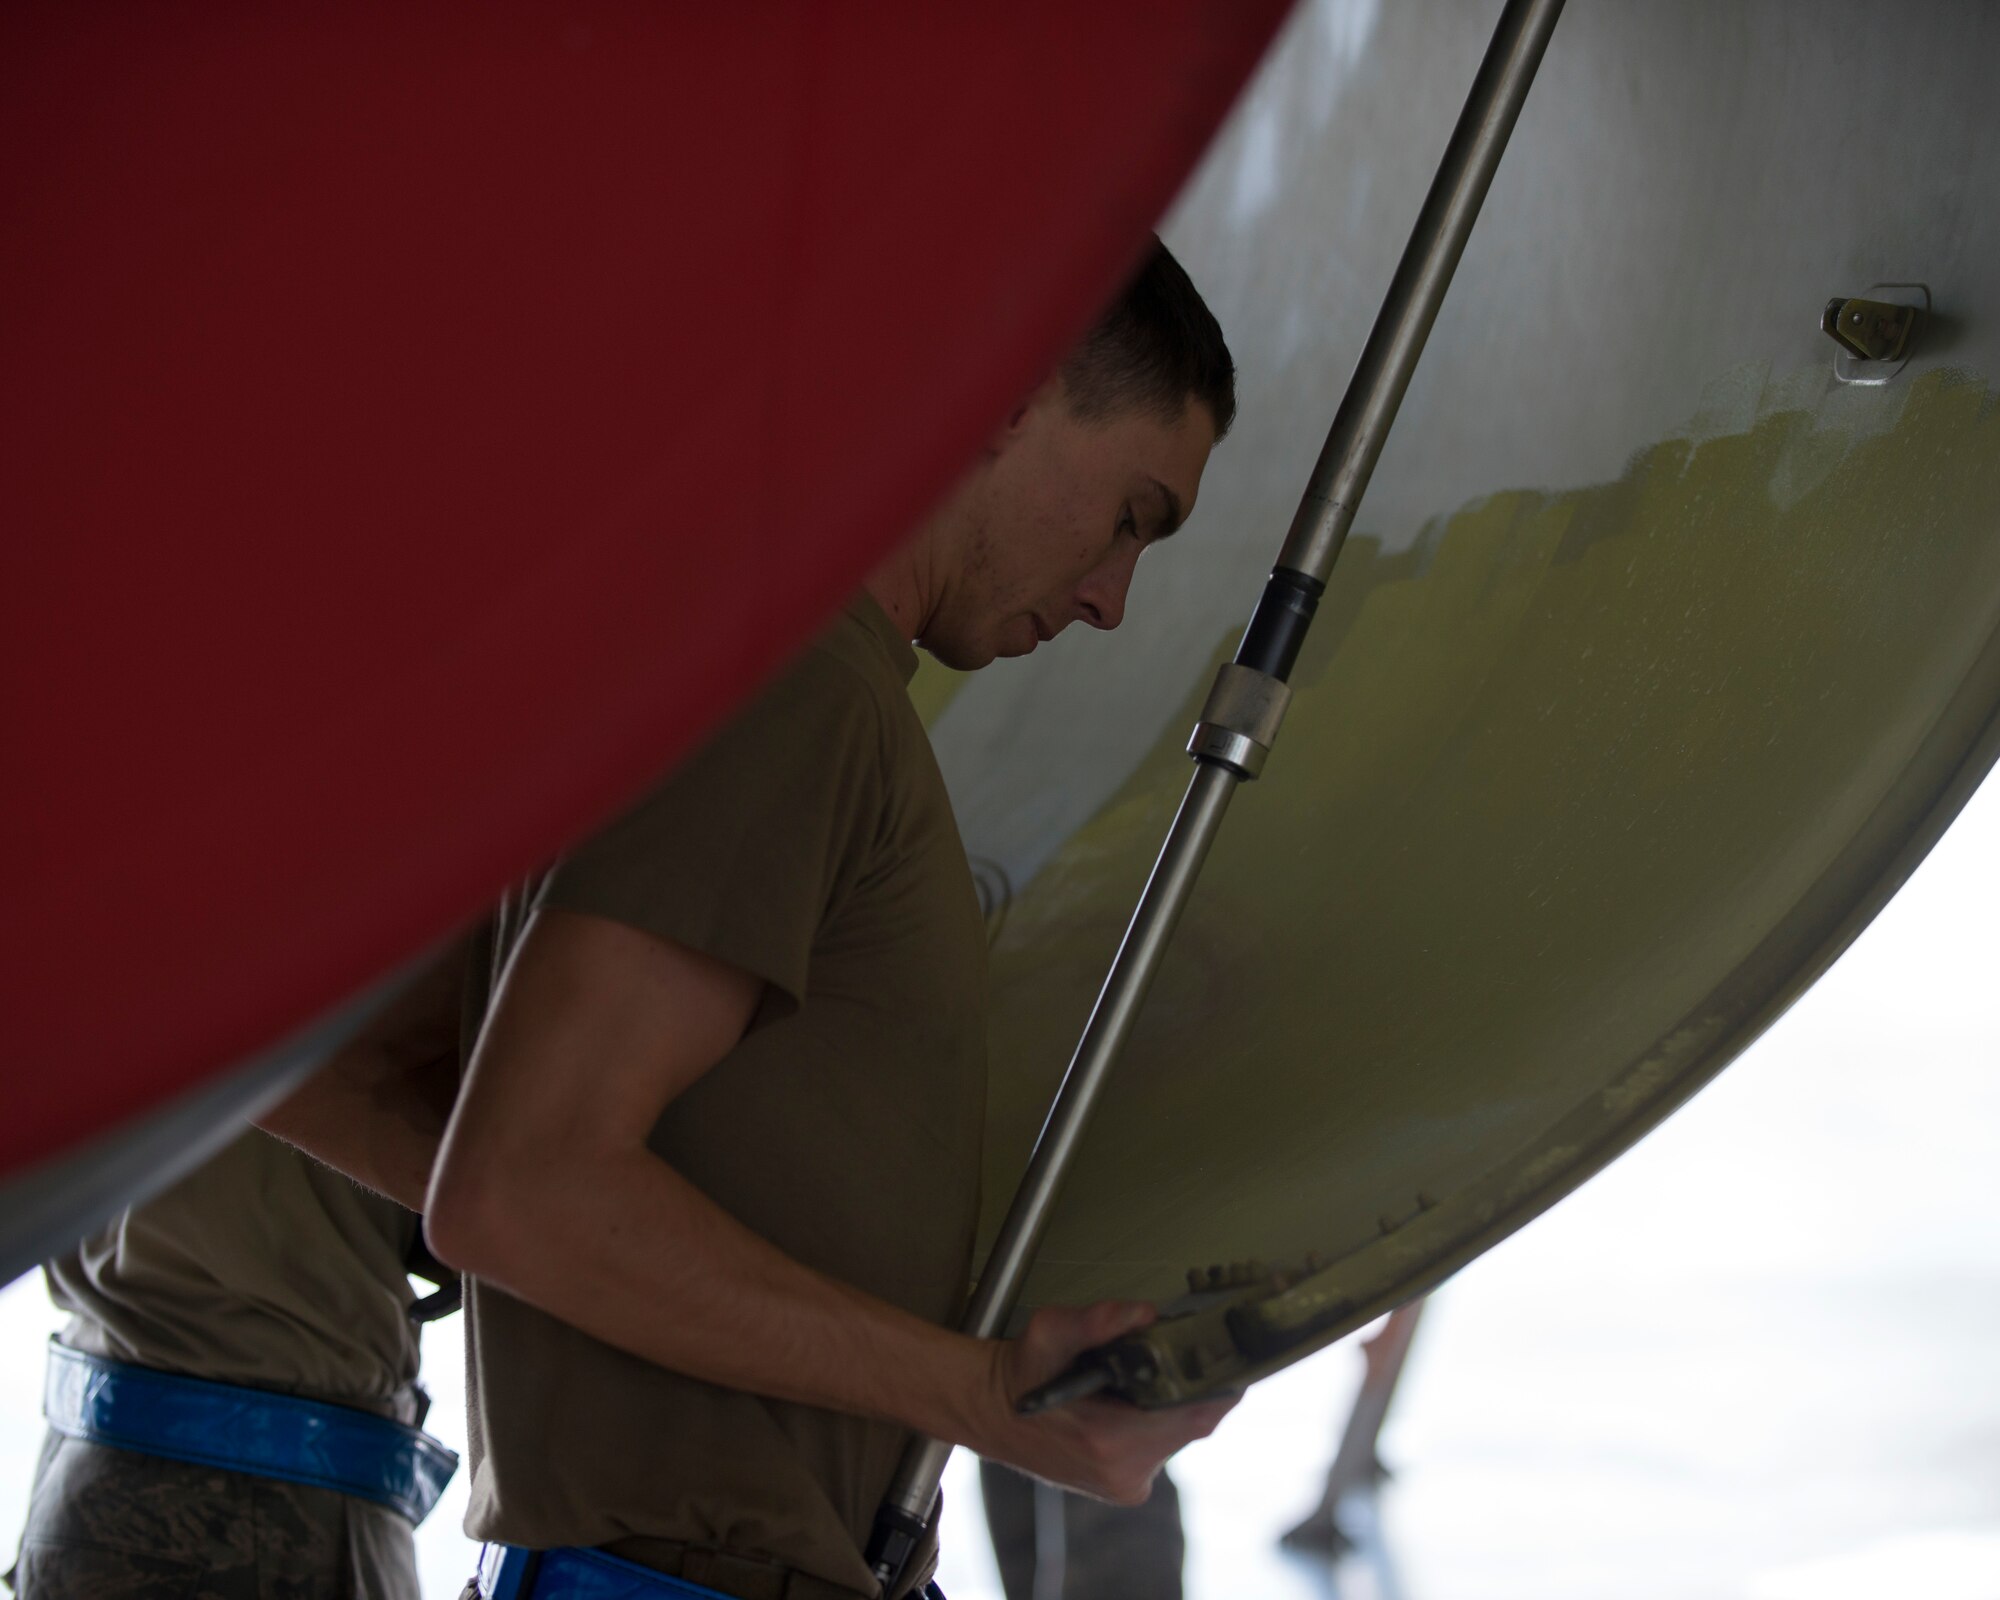 U.S. Air Force Airman 1st Class Caylor Jones, a 6th Aircraft Maintenance Squadron communications and navigation apprentice, closes a cowling on a KC-135 Stratotanker aircraft at MacDill Air Force Base, Fla., Nov. 19, 2018.